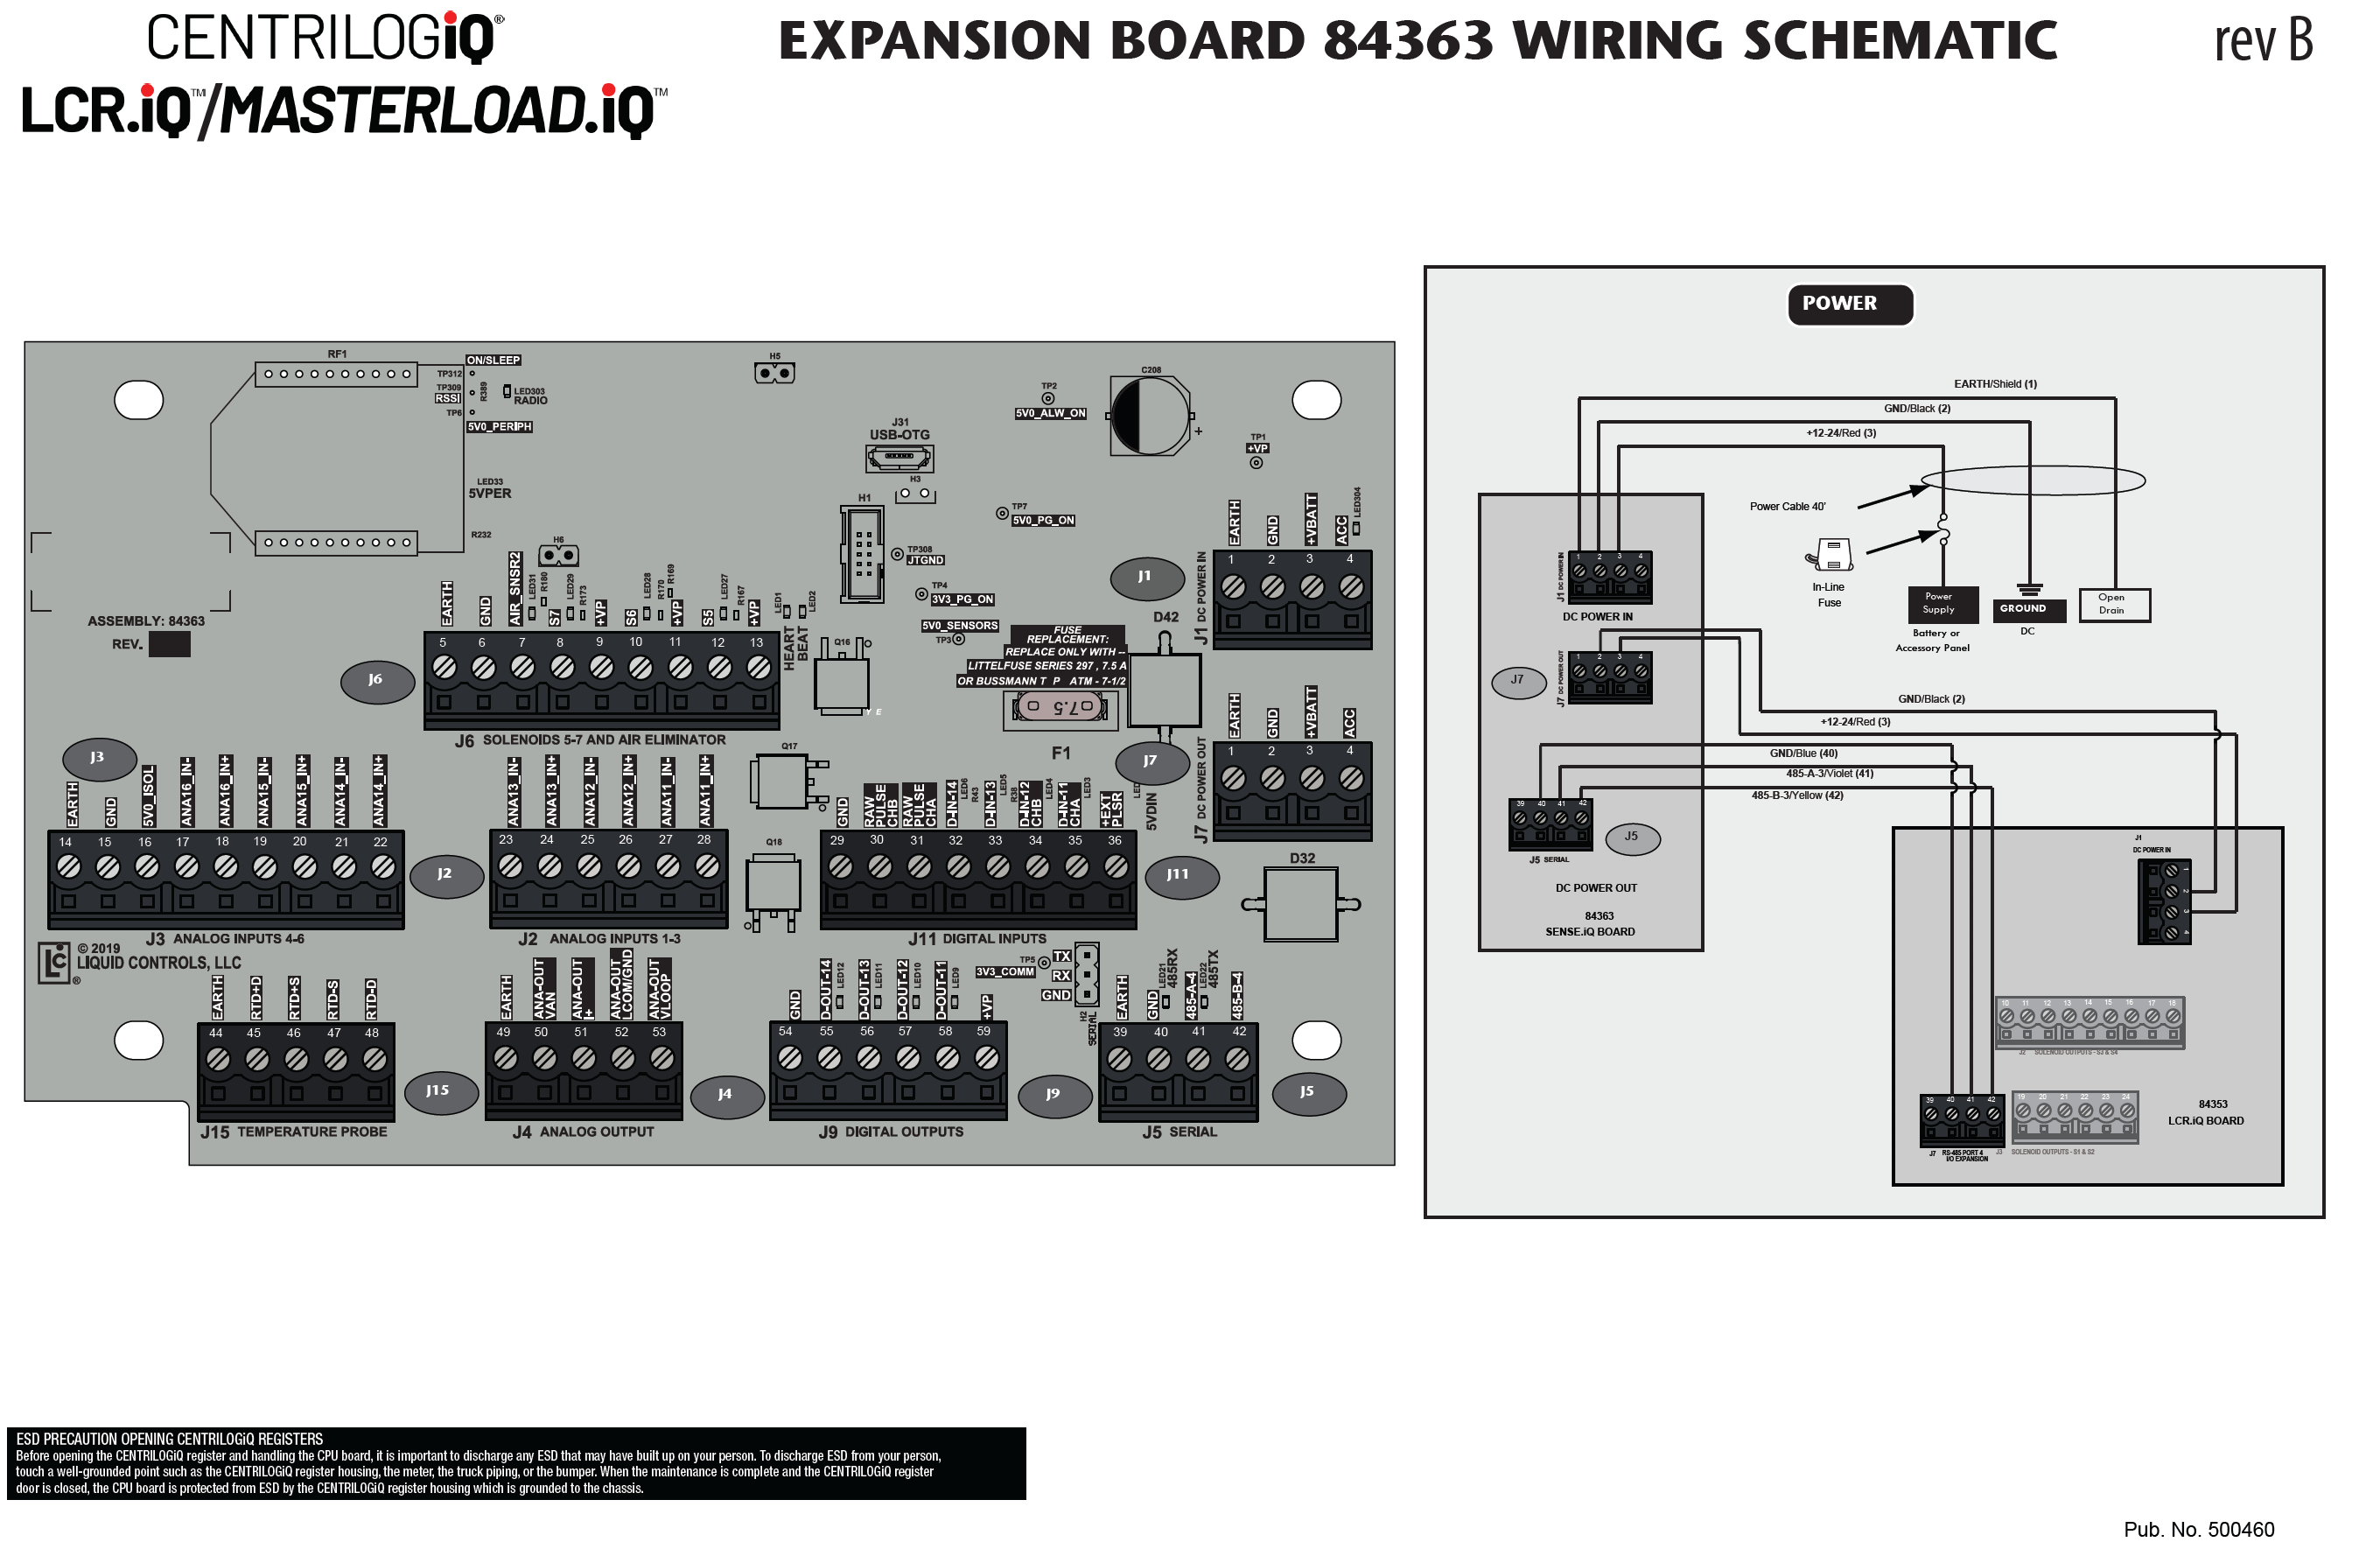 expansion_board_wiring_diagram_1